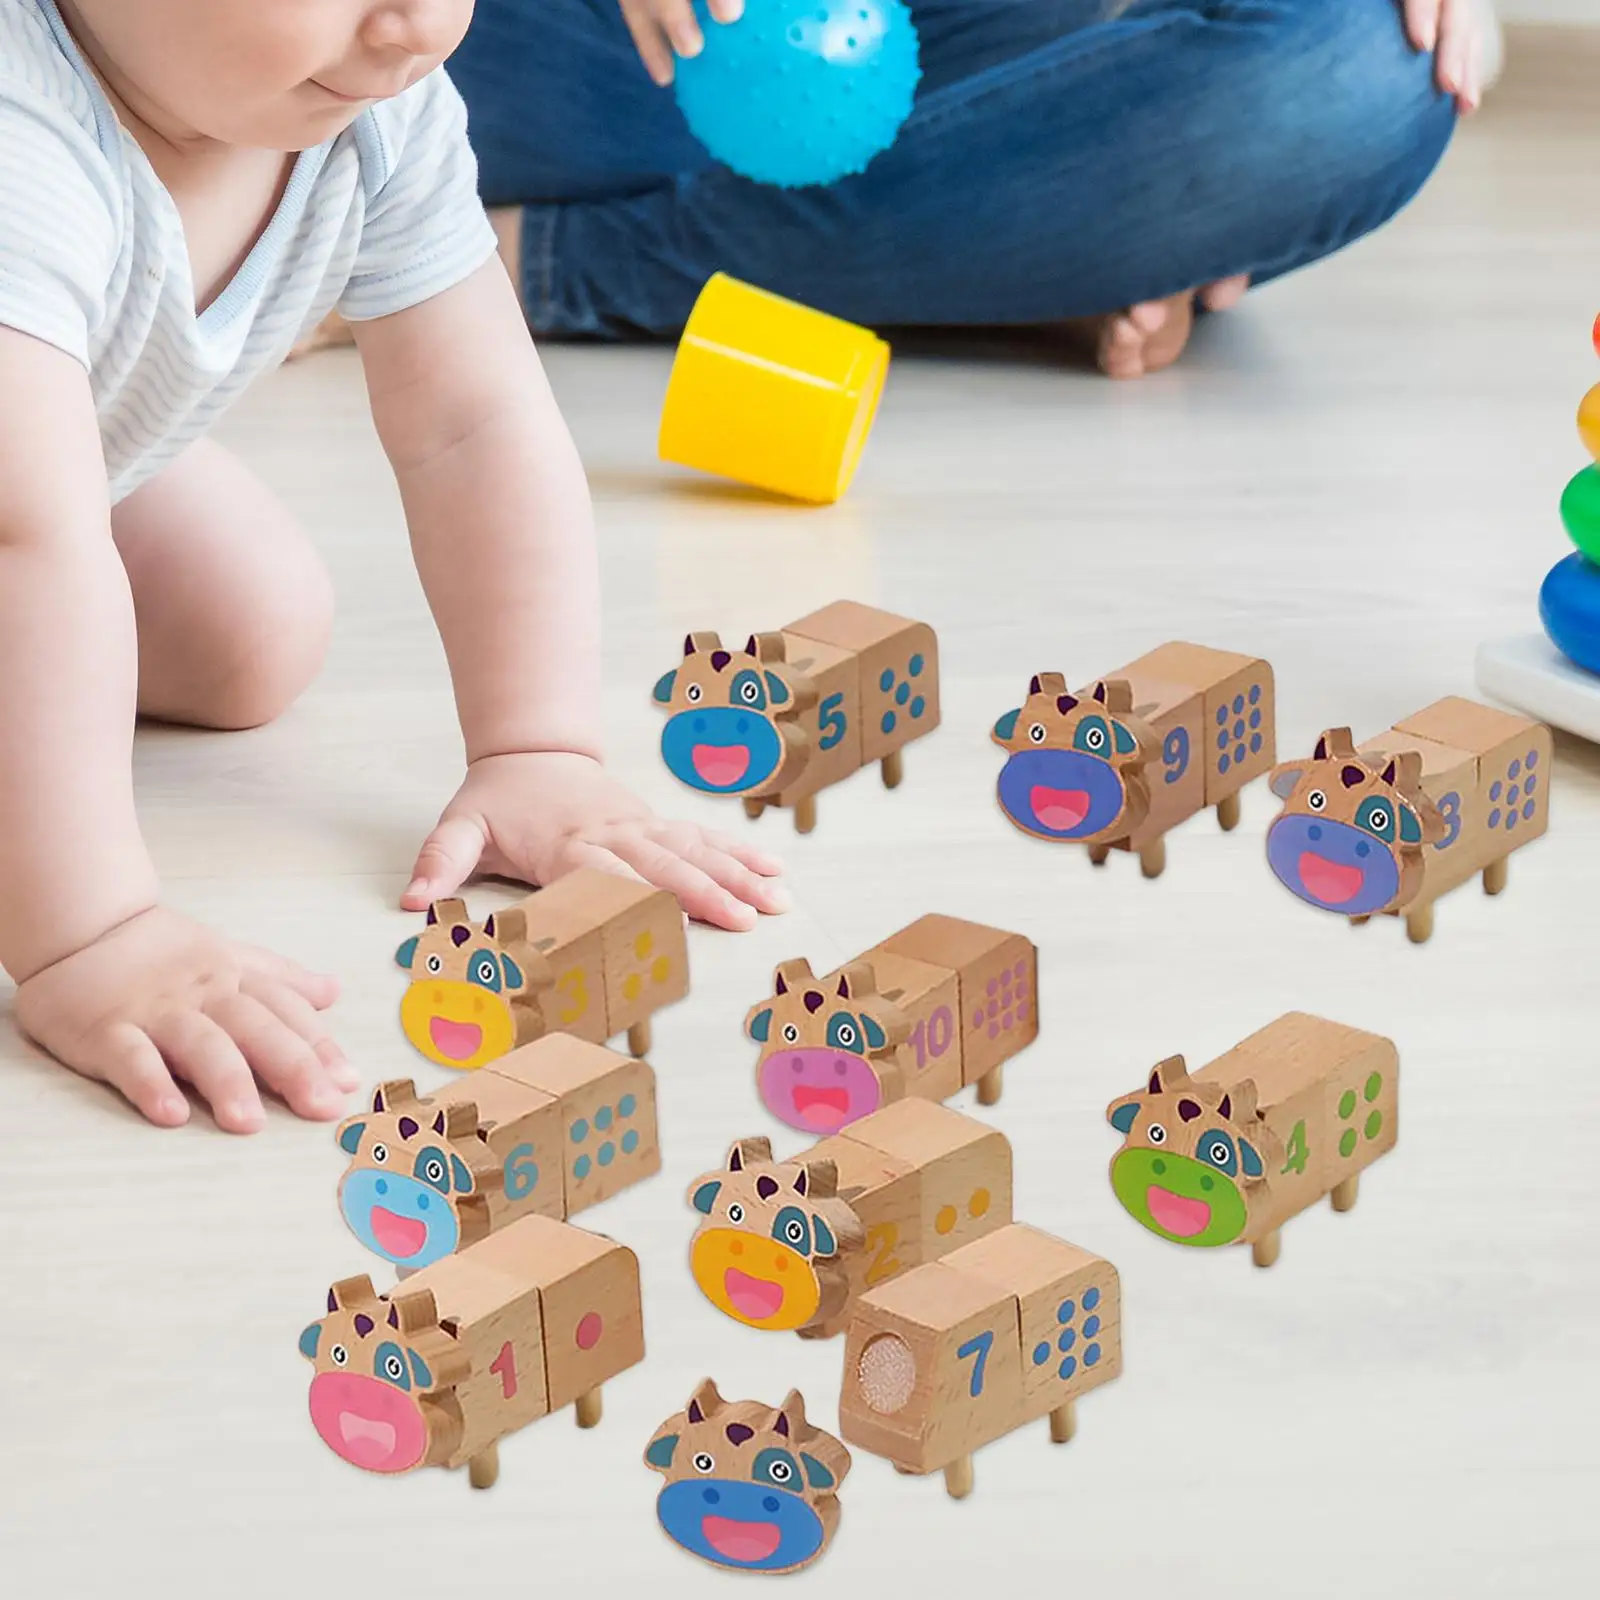 10 Pieces Montessori Toys Early Development Wooden Sorting Stacking Block for Age 4 5 6 Children Boys Unisex Birthday Gifts